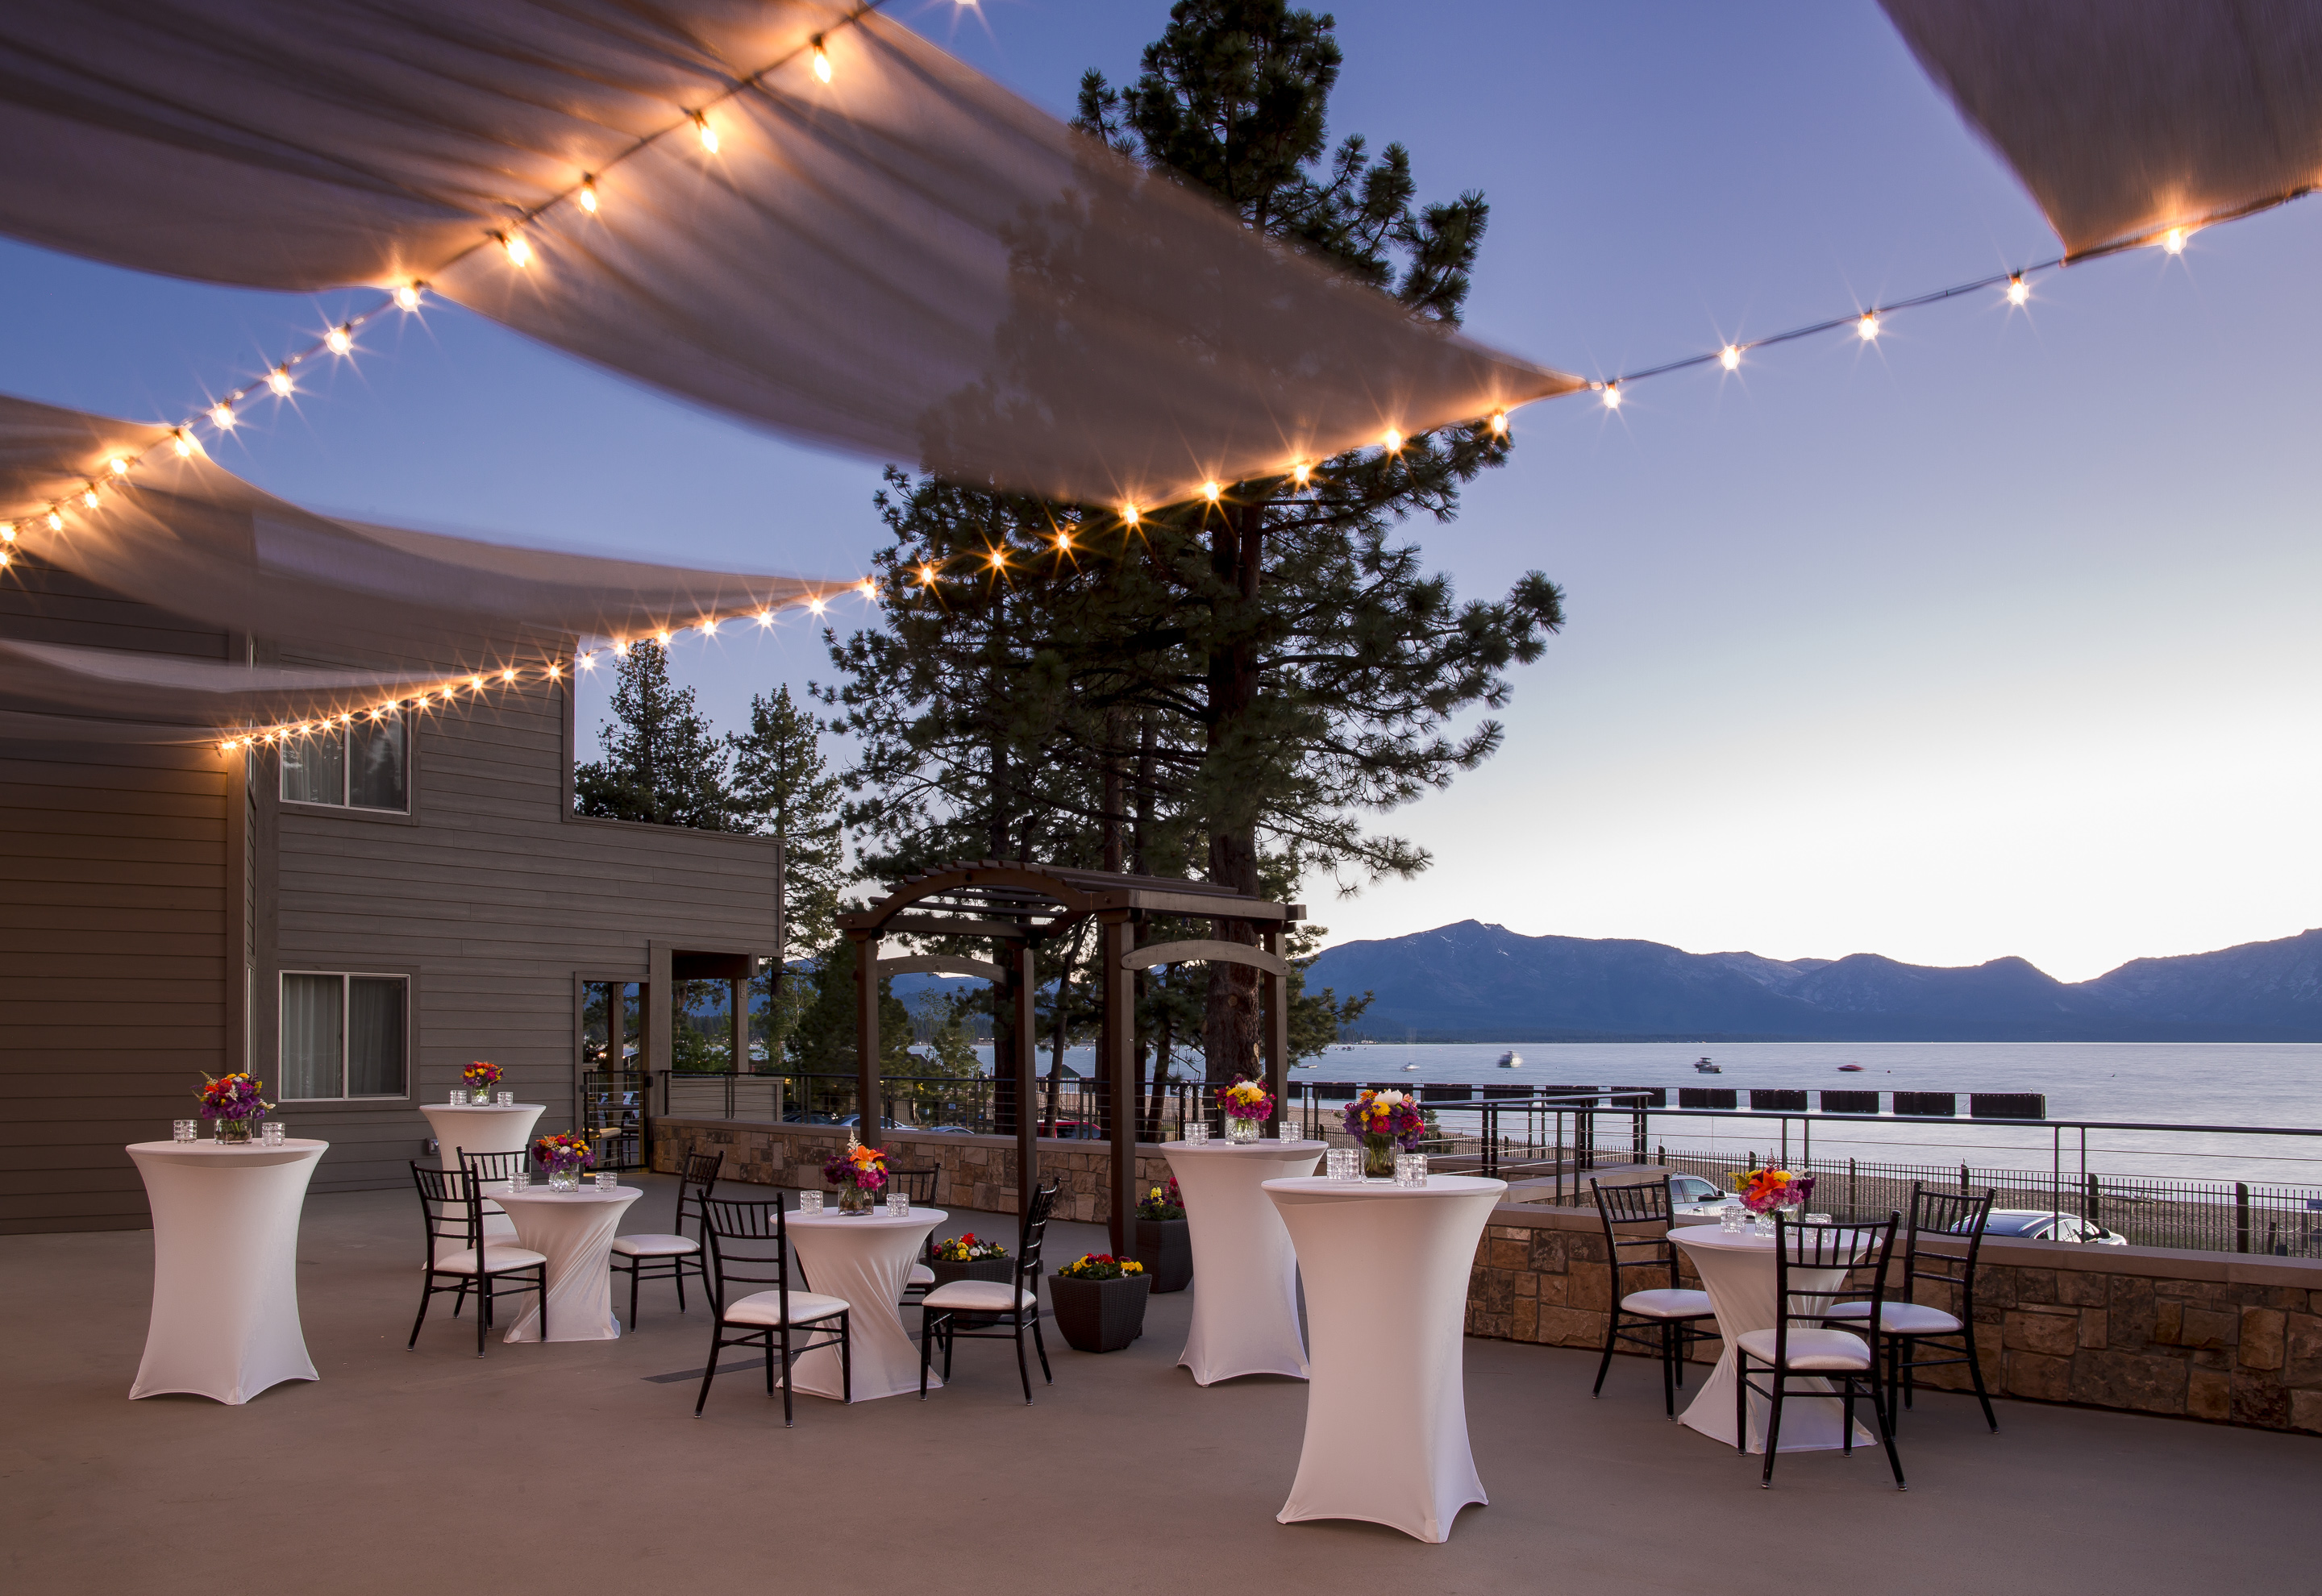 A perfect venue for weddings, conferences or just enjoying the view, The Landing’s rooftop deck emphasizes the resort’s close connection with sparkling Lake Tahoe from its South Lake Tahoe location.